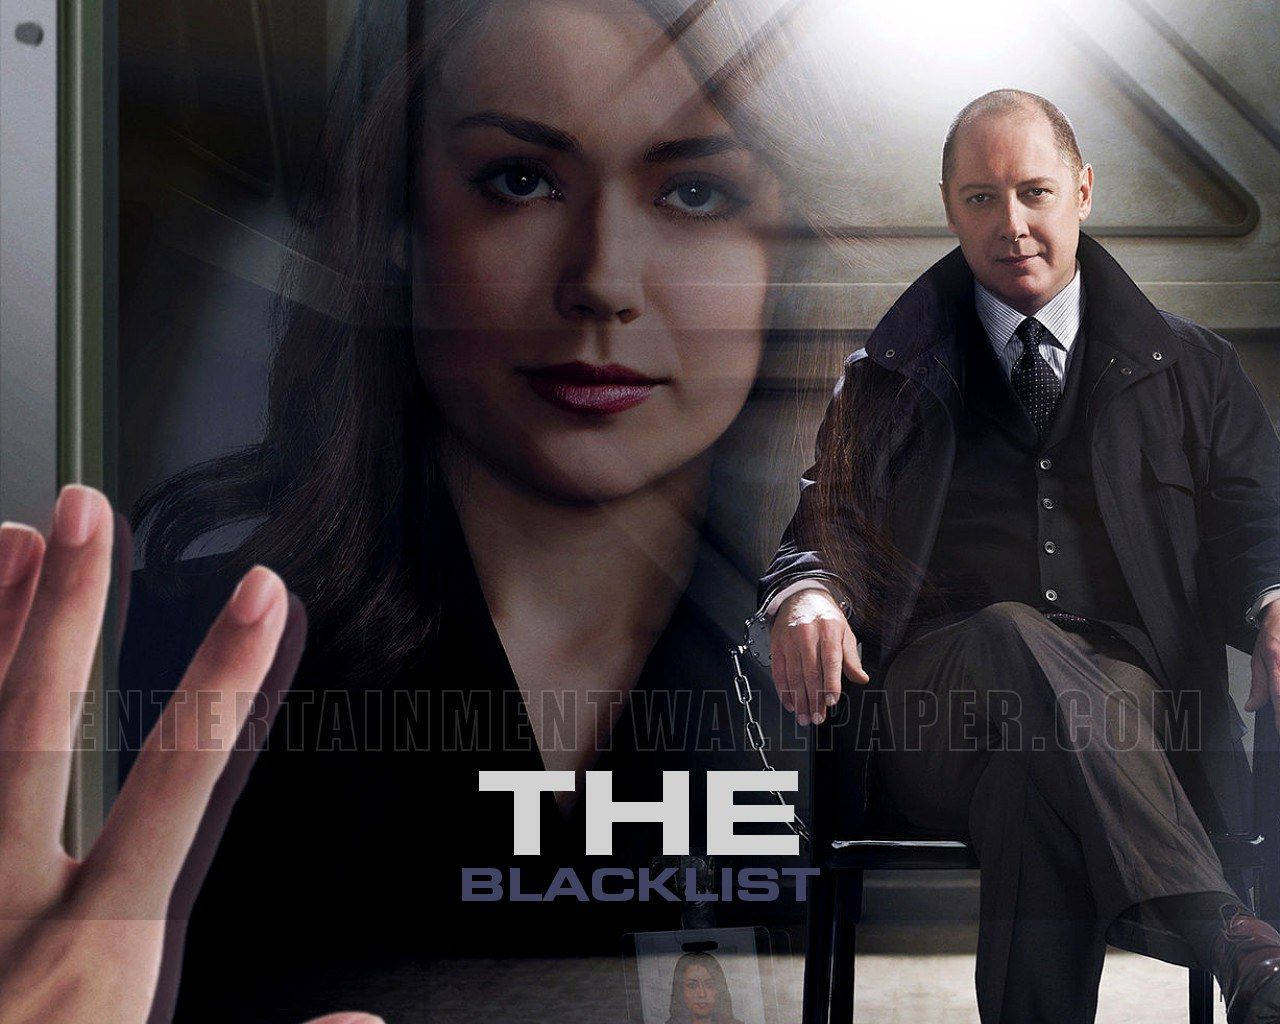 Keen Looking At Red The Blacklist Wallpaper